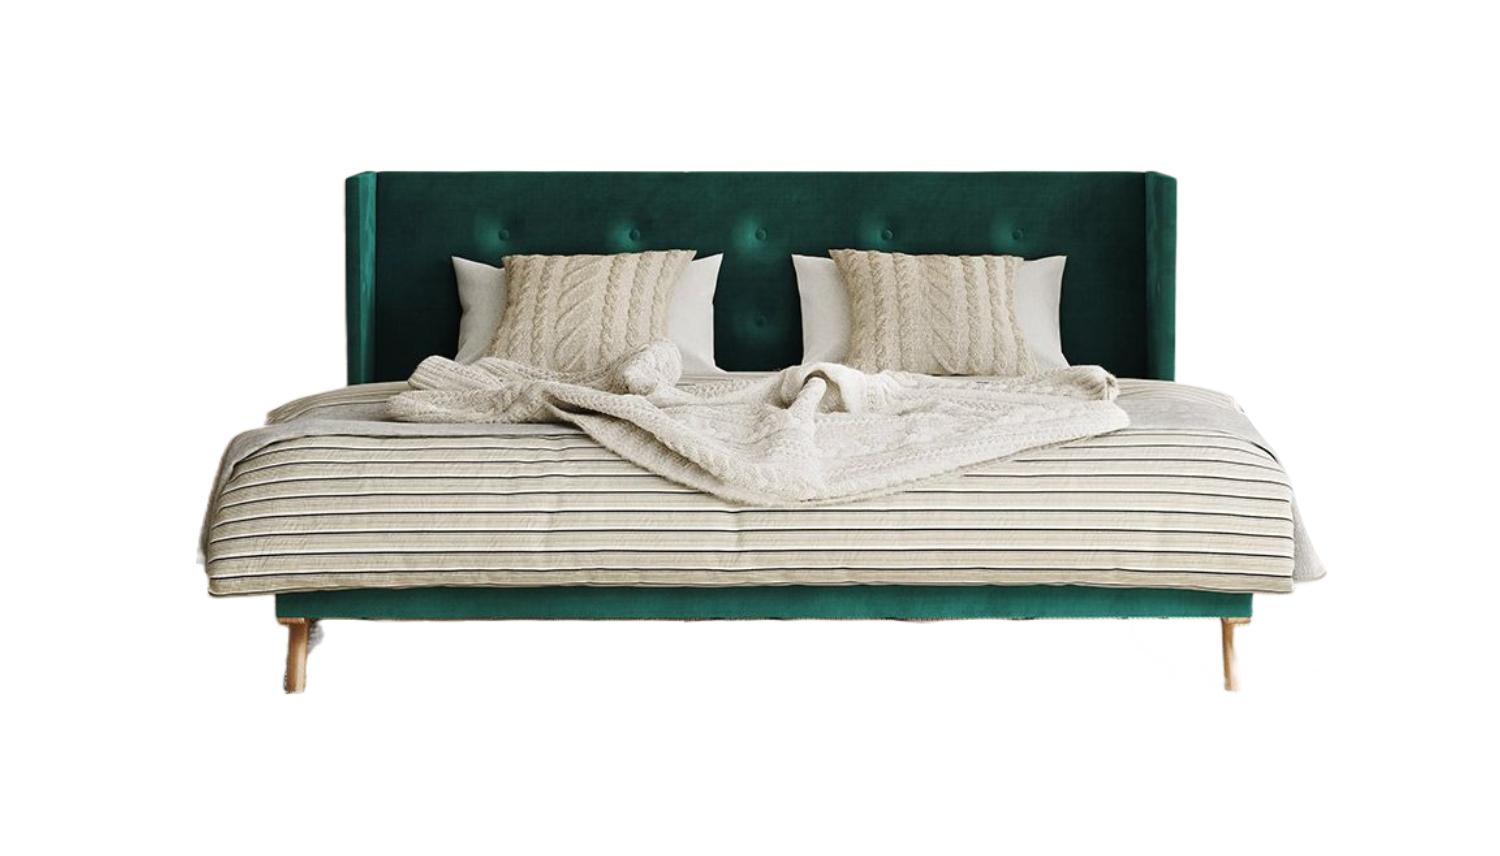 Contemporary, Modern Panel Bed Durango VGMABR-83 VGMABR-83-K in Walnut, Green Fabric